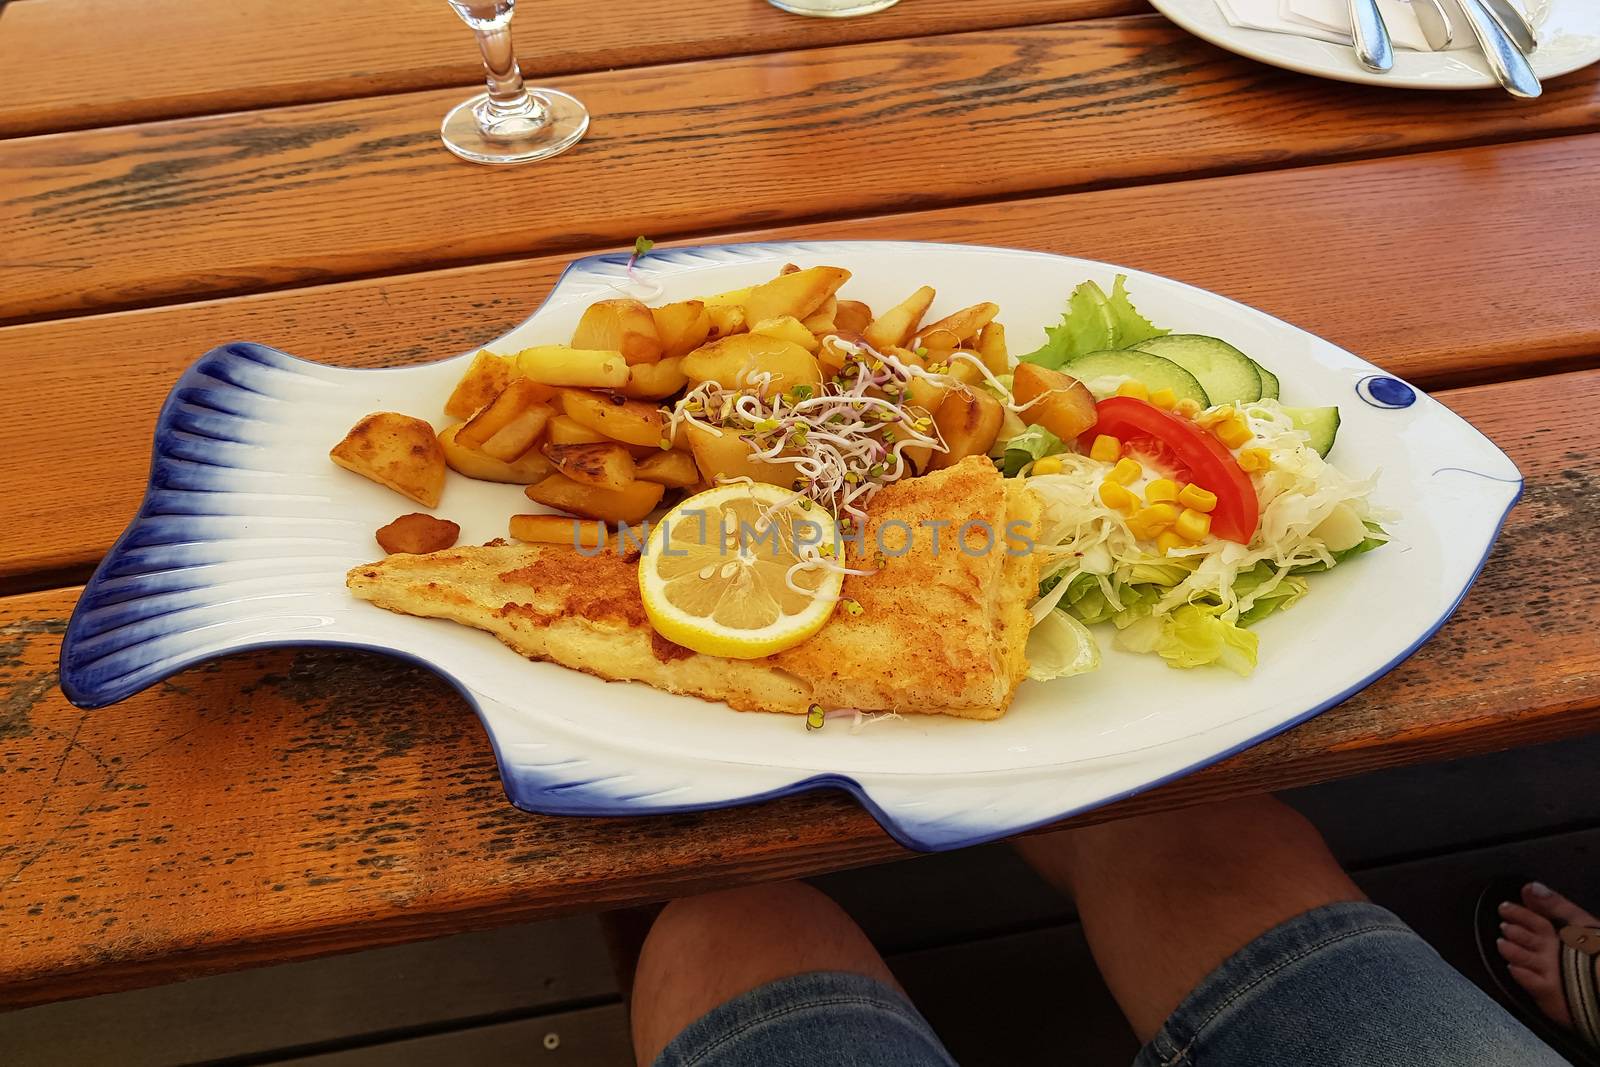 Fried fish with fried potatoes and lemon slices on fish-shaped plate